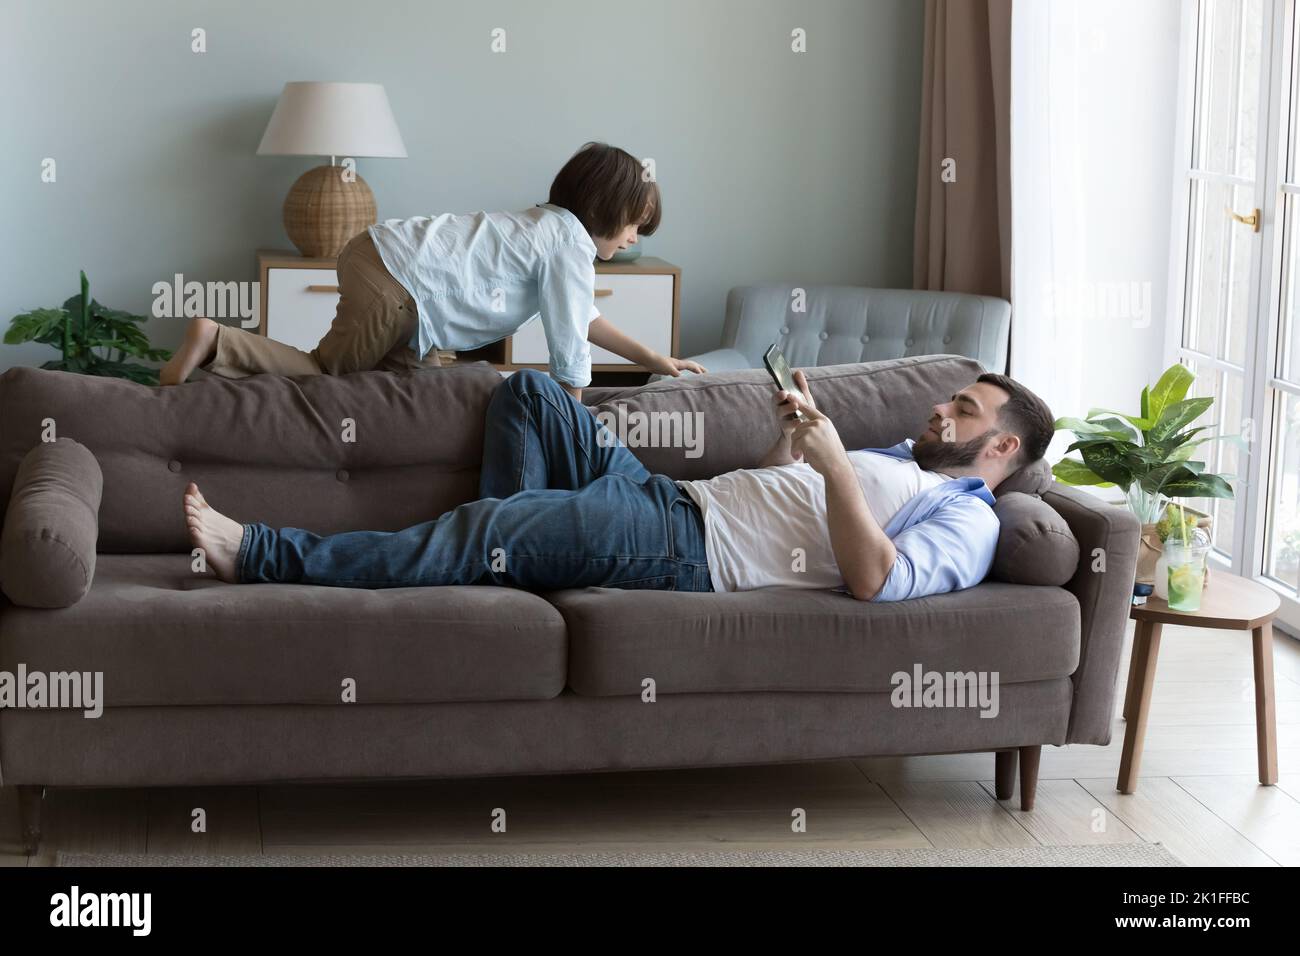 Relaxed dad resting on sofa, holding mobile phone Stock Photo